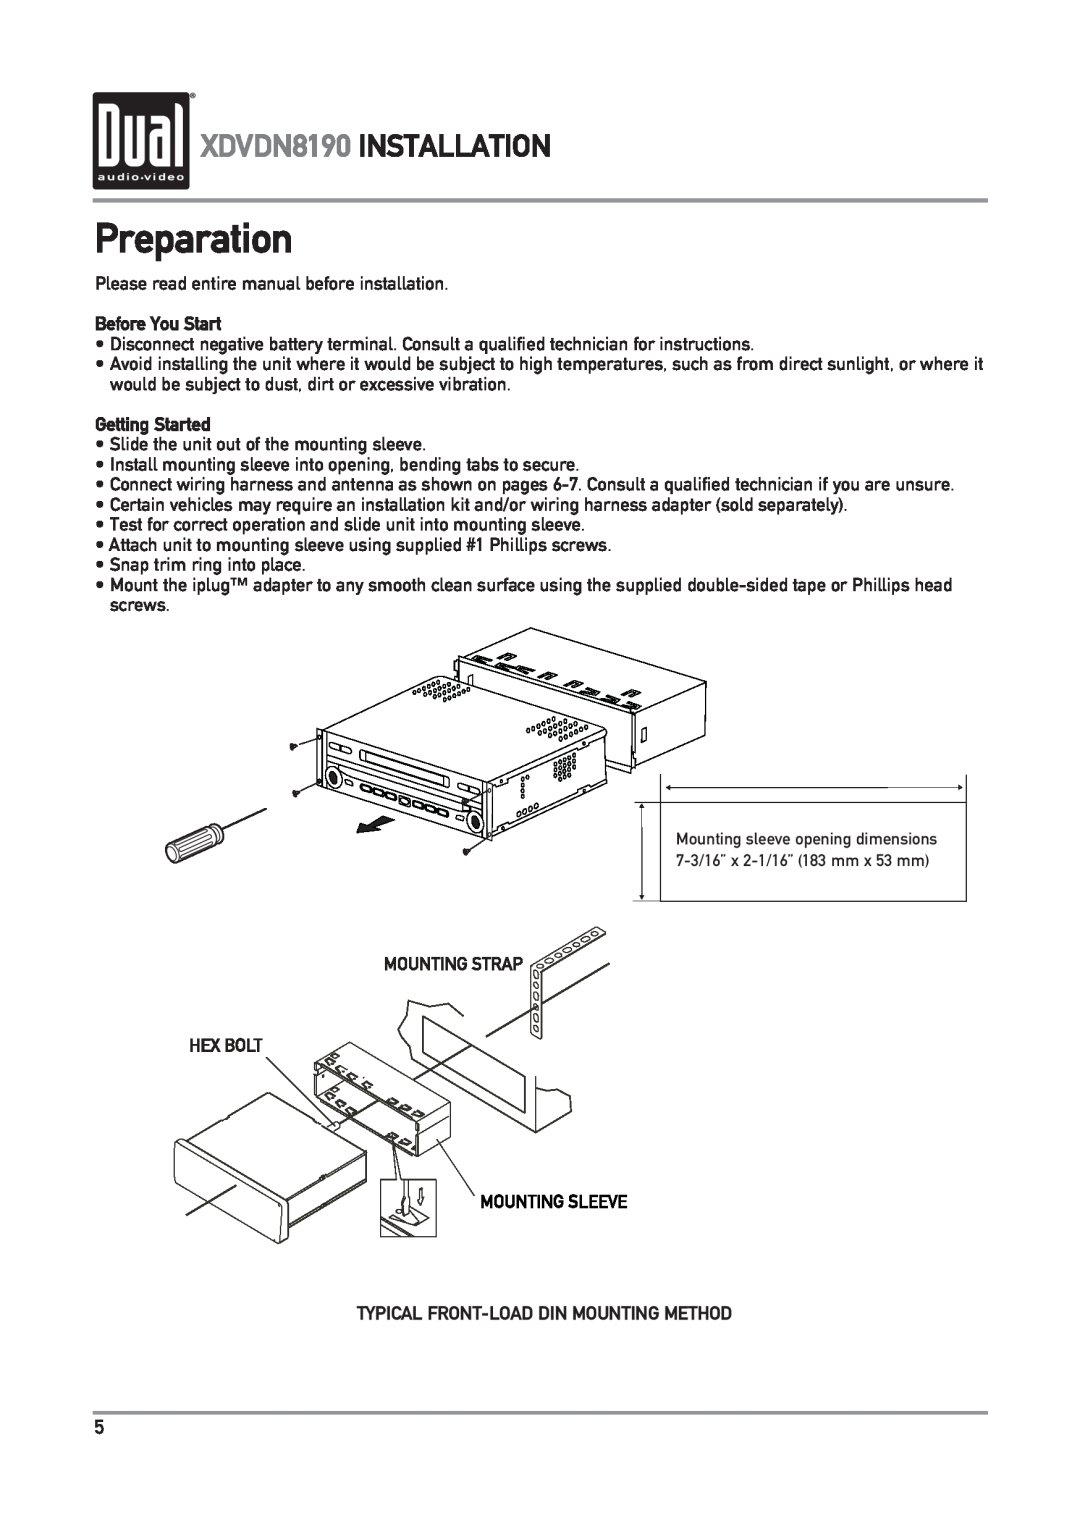 Dual Preparation, XDVDN8190 INSTALLATION, Before You Start, Getting Started, Typical Front-Loaddin Mounting Method 